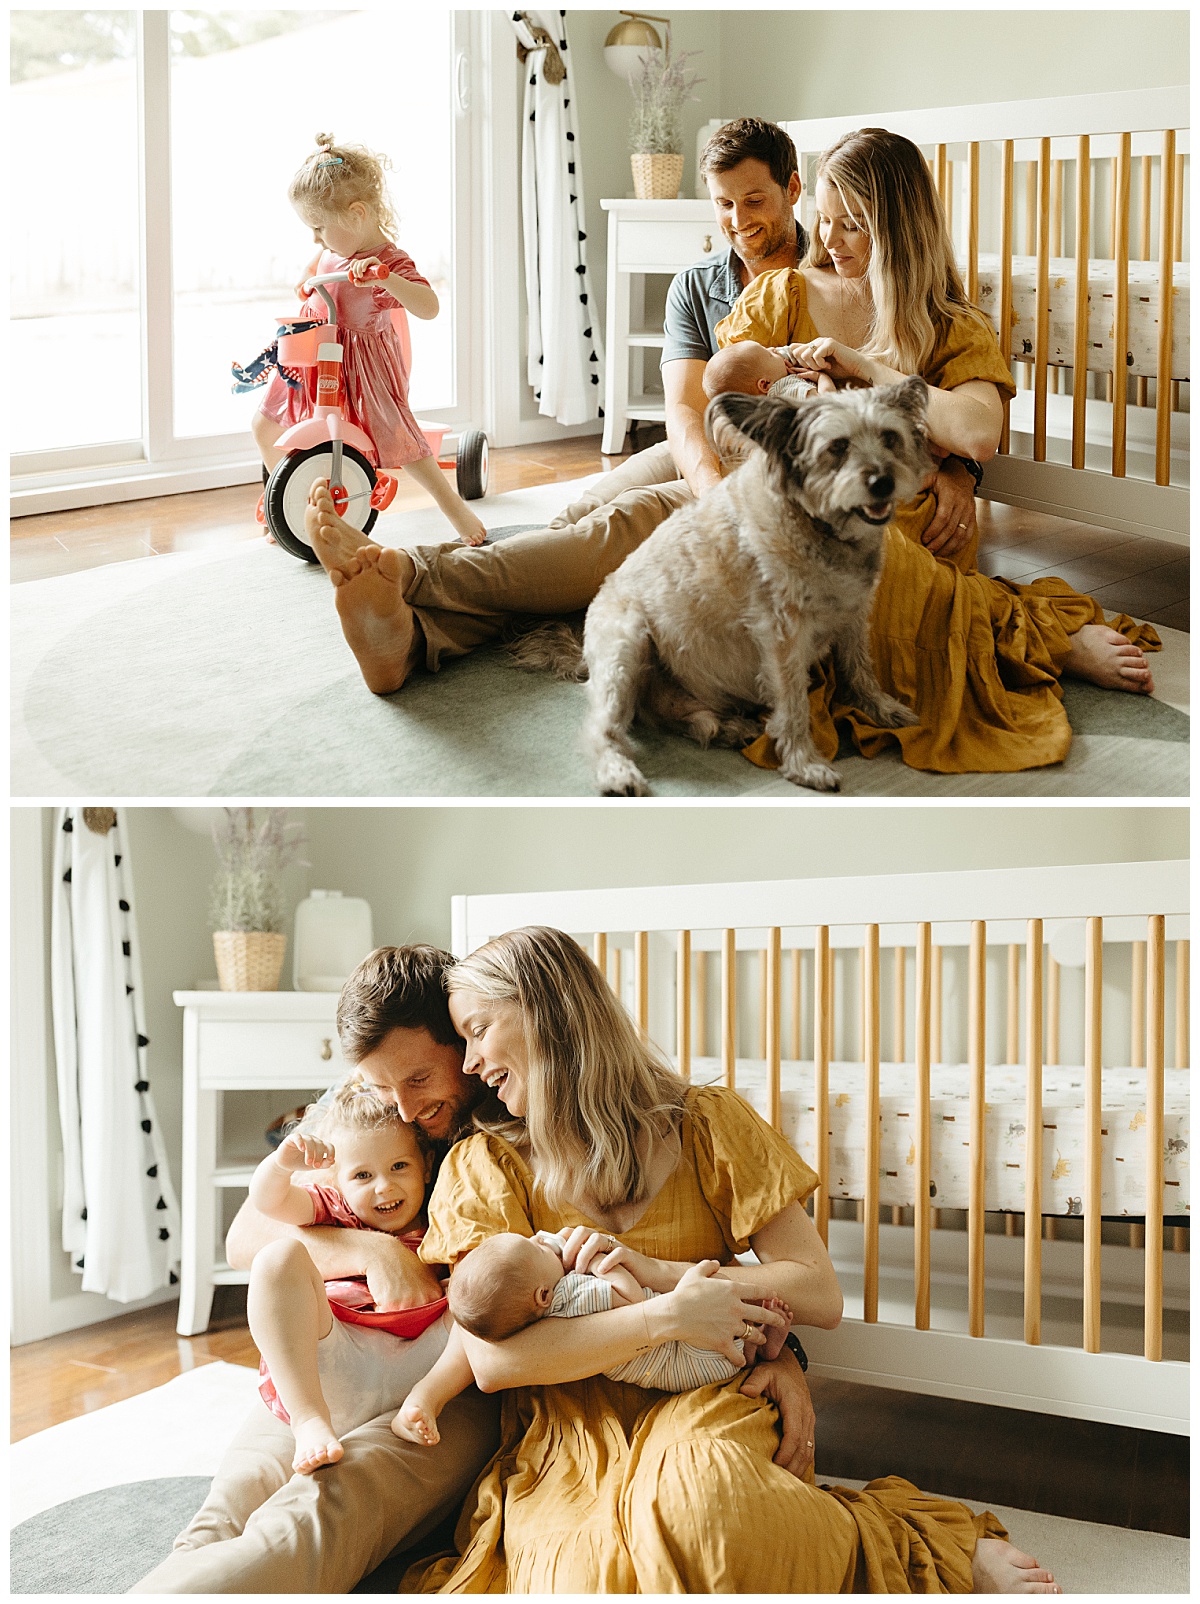 parents hold baby while dog sits near and daughter rides tricycle by Nikki Meer Photography